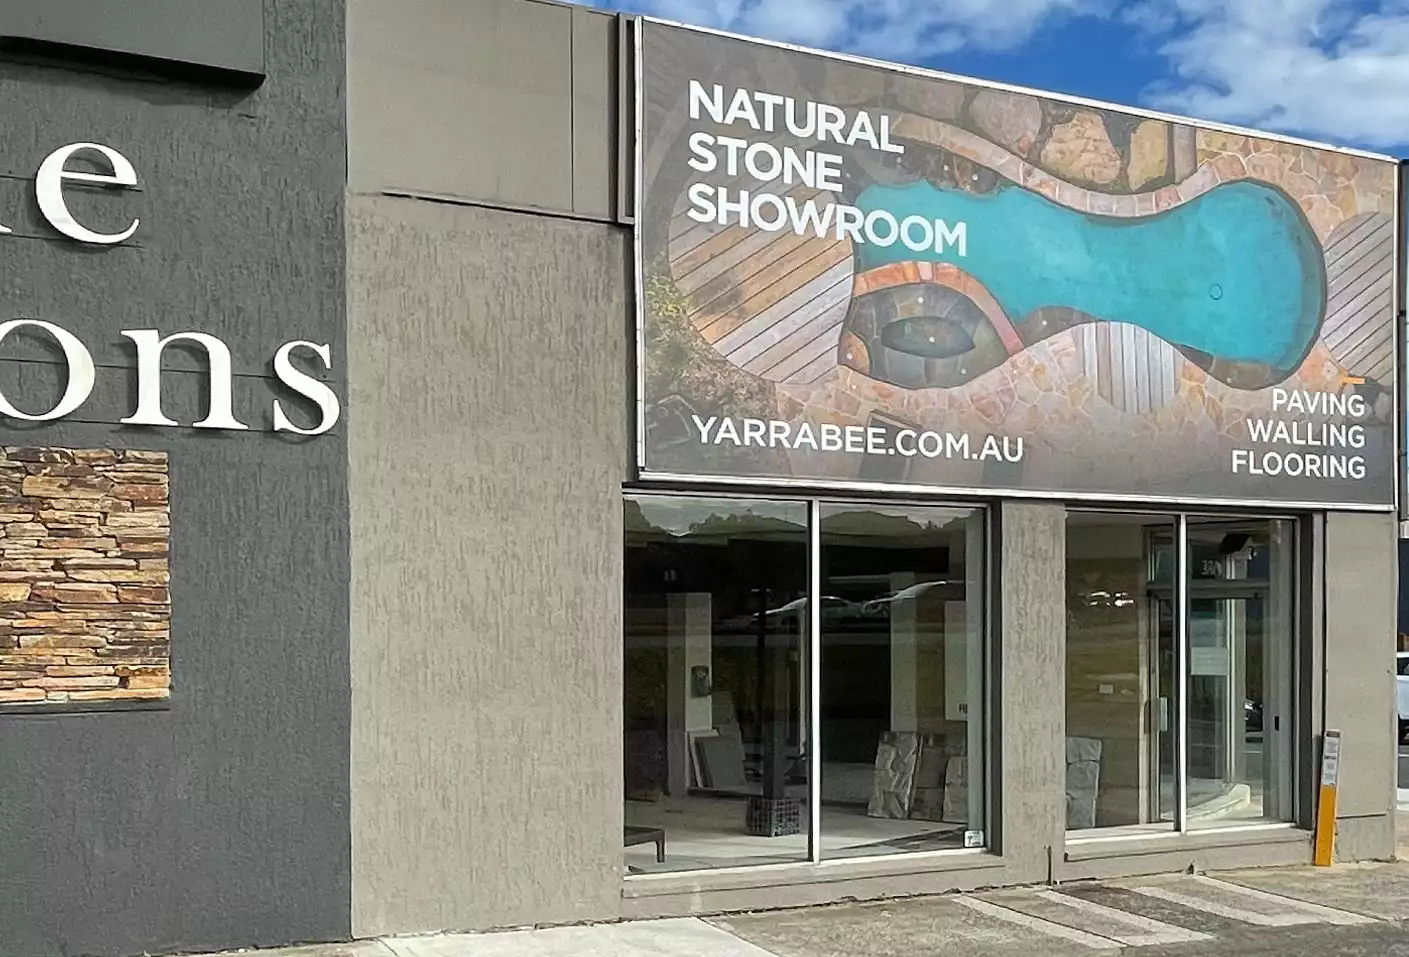 Yarrabee is a leading expert and trusted supplier of quality natural stone products